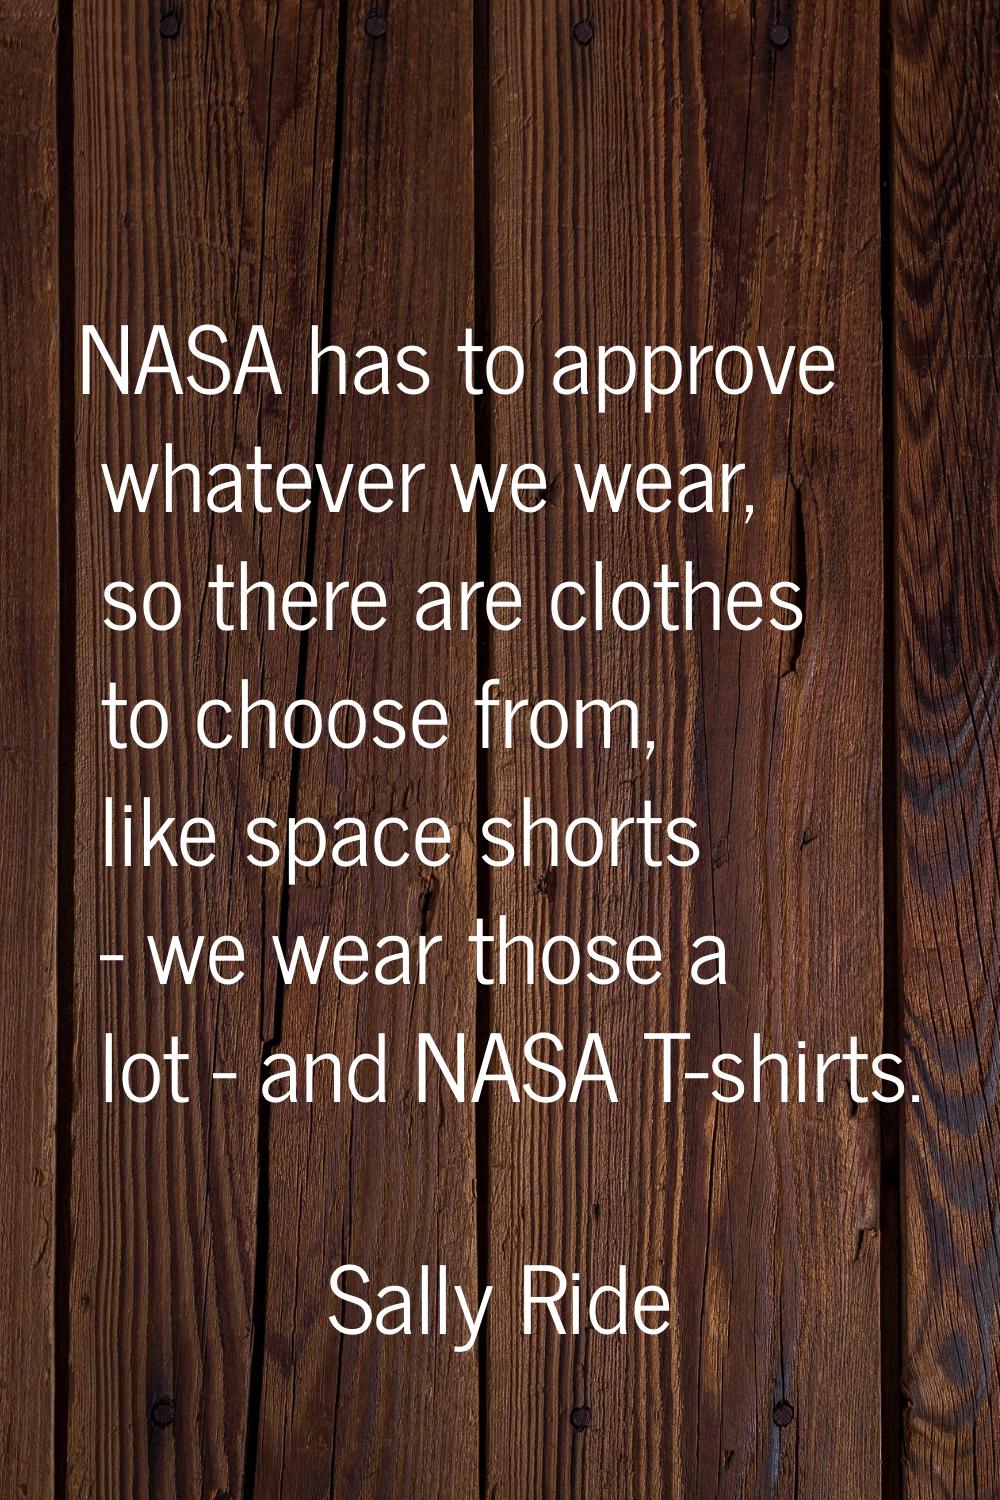 NASA has to approve whatever we wear, so there are clothes to choose from, like space shorts - we w